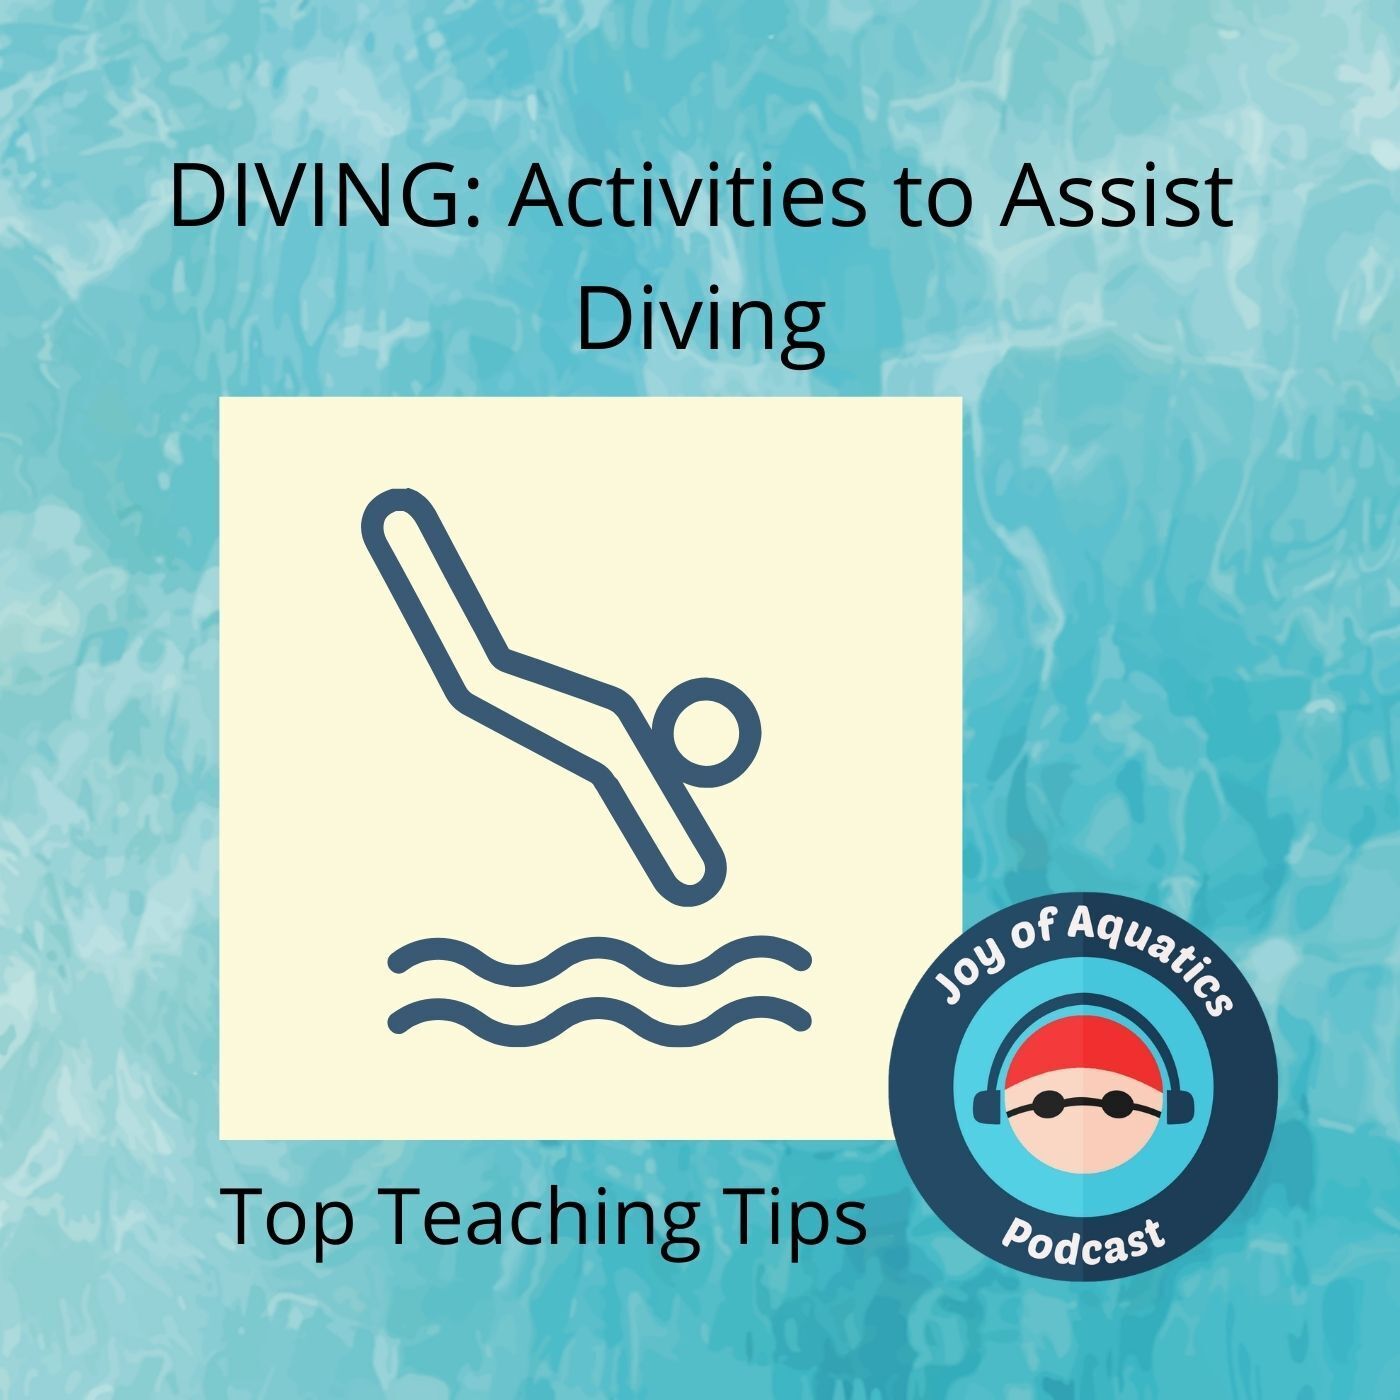 DIVING: Activities to Assist Diving